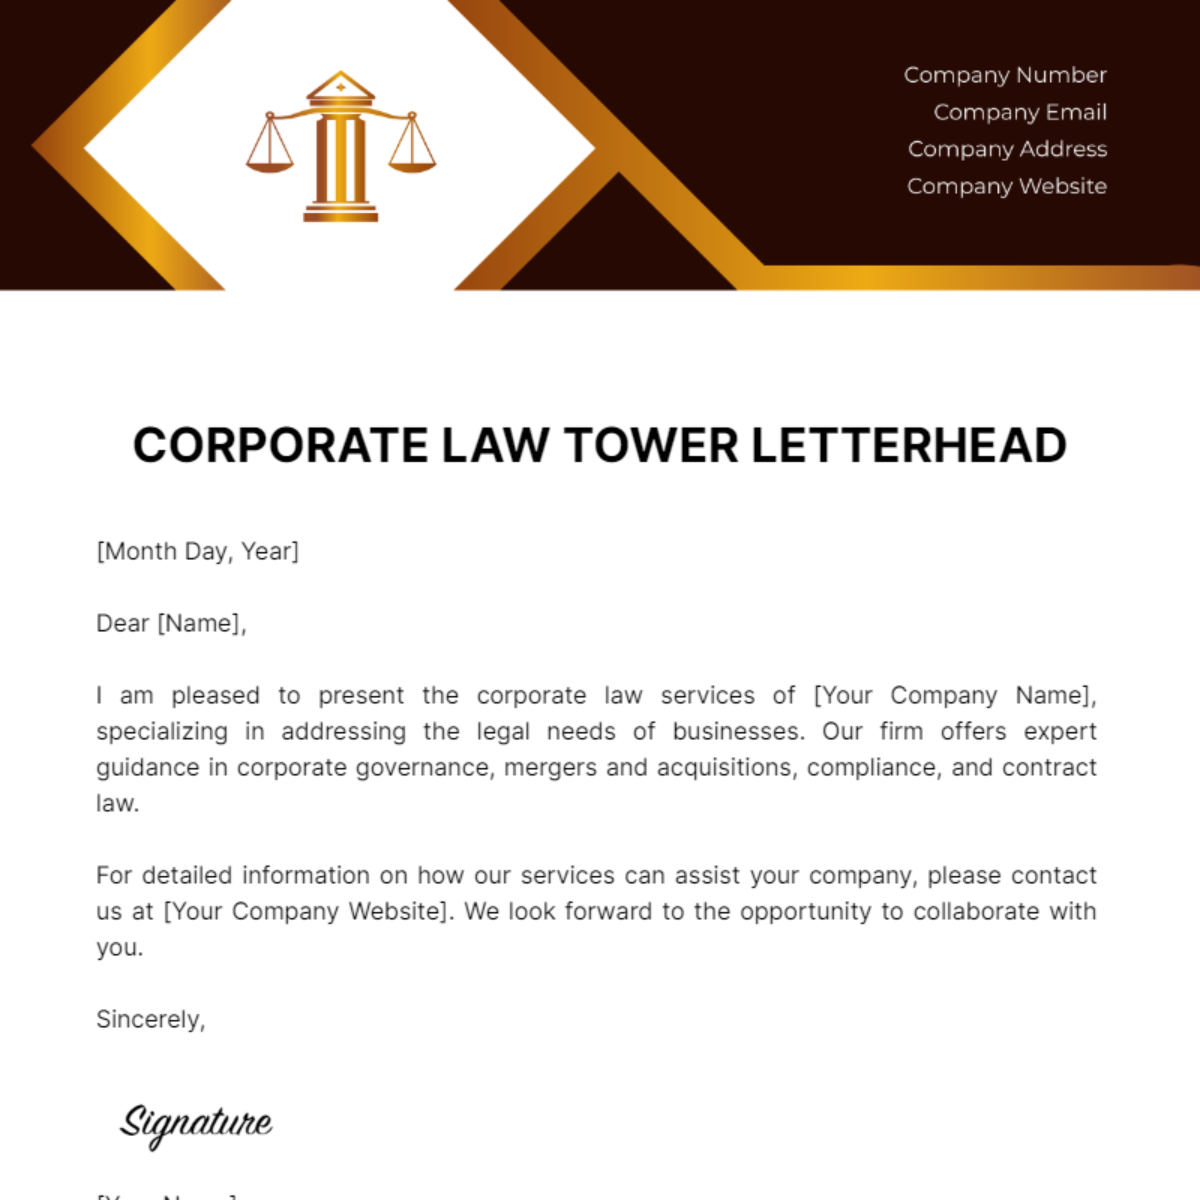 Corporate Law Tower Letterhead Template